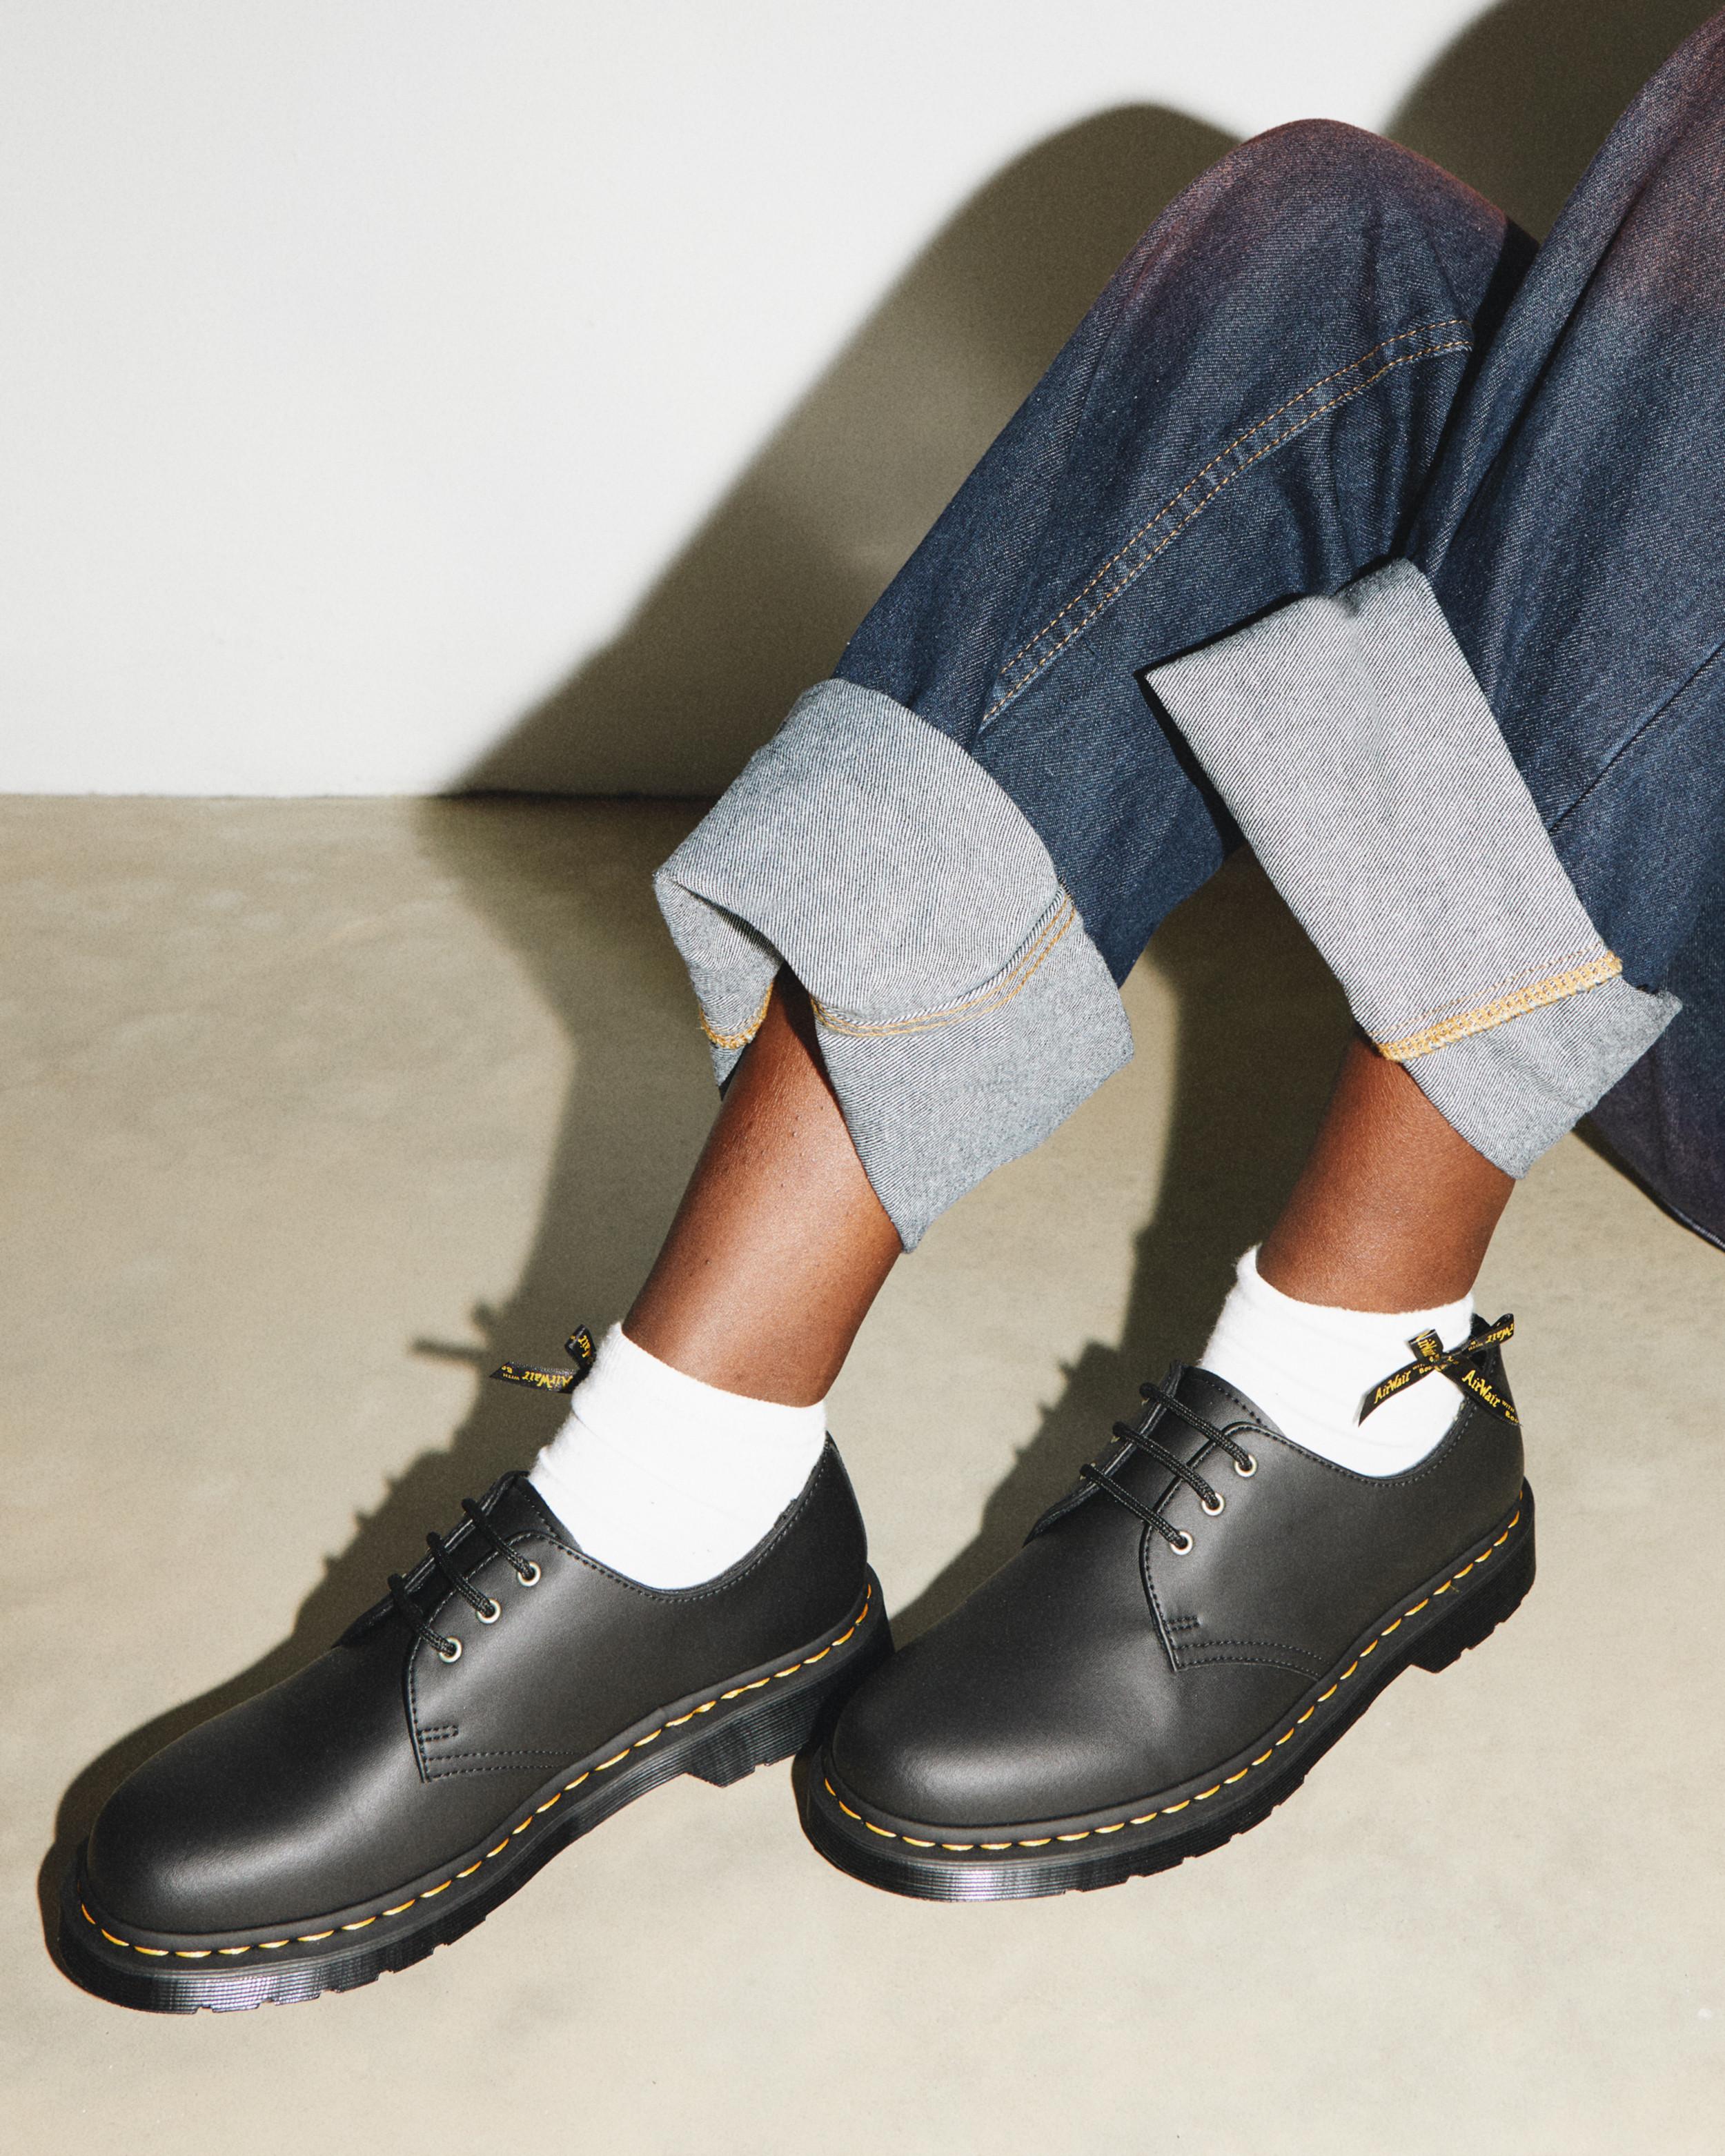 1461 Genix Nappa Reclaimed Leather Oxford Shoes in Black